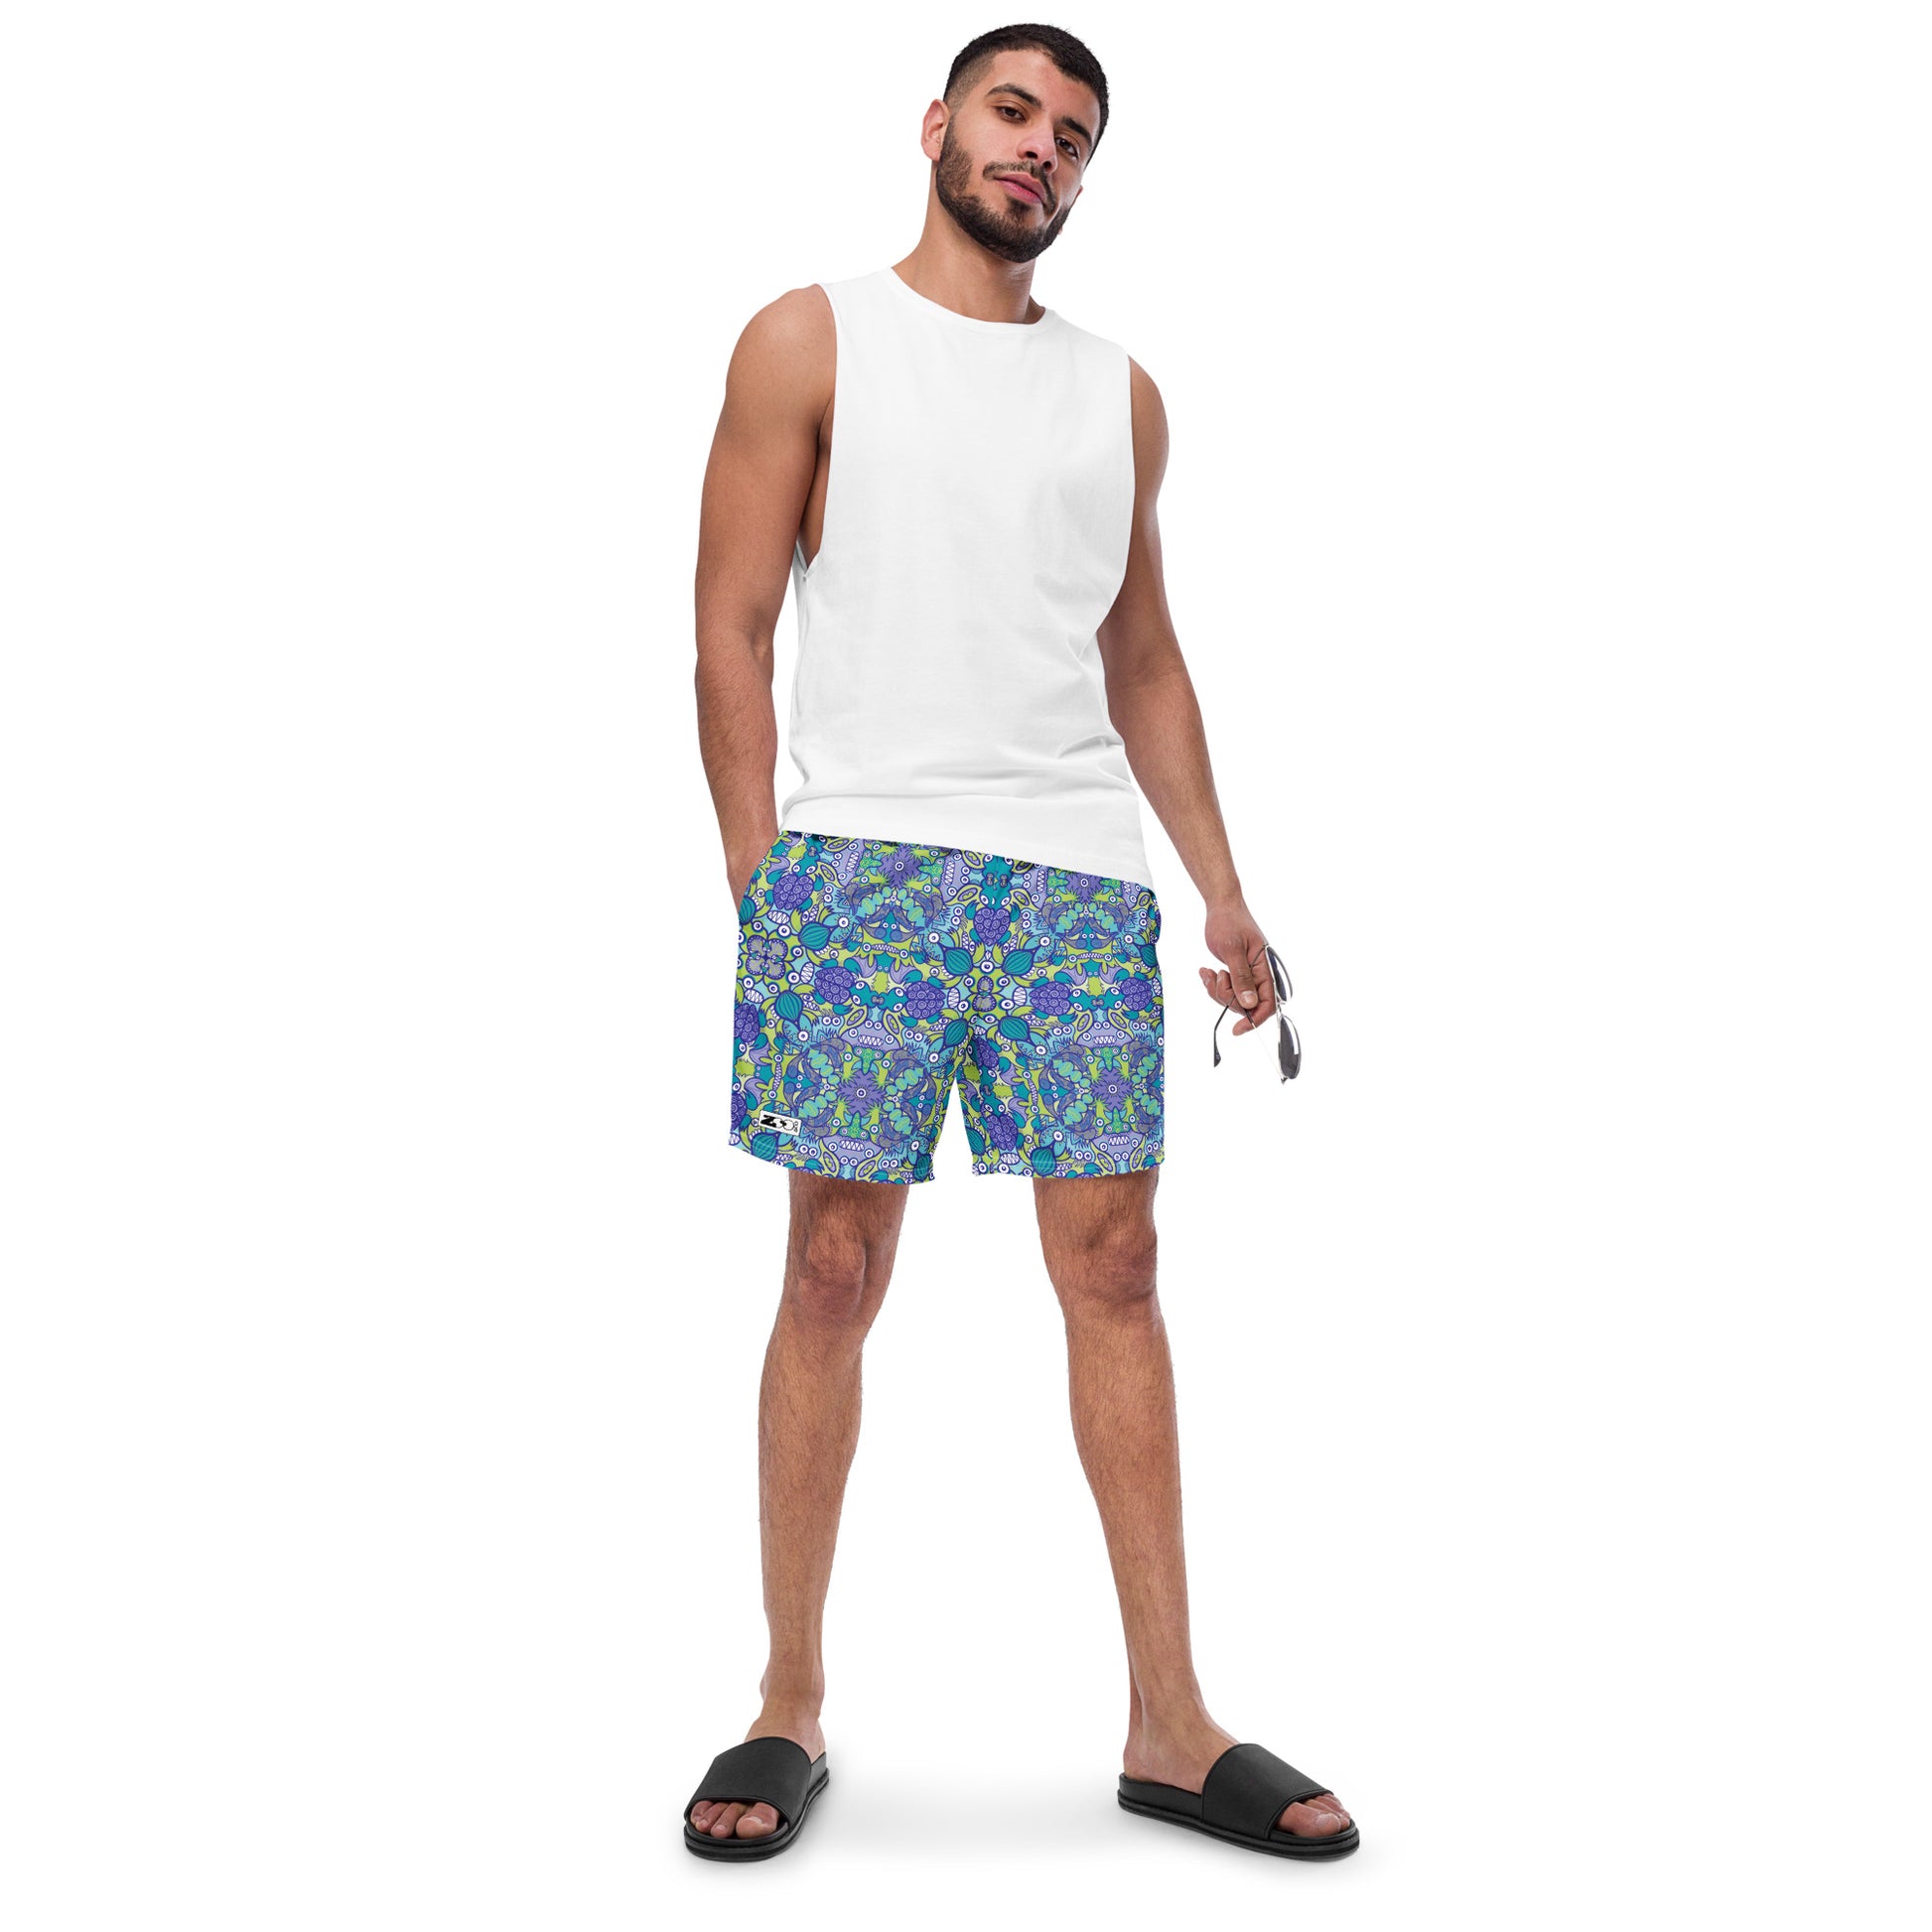 Once upon a time in an ocean full of life Men's swim trunks. Lifestyle